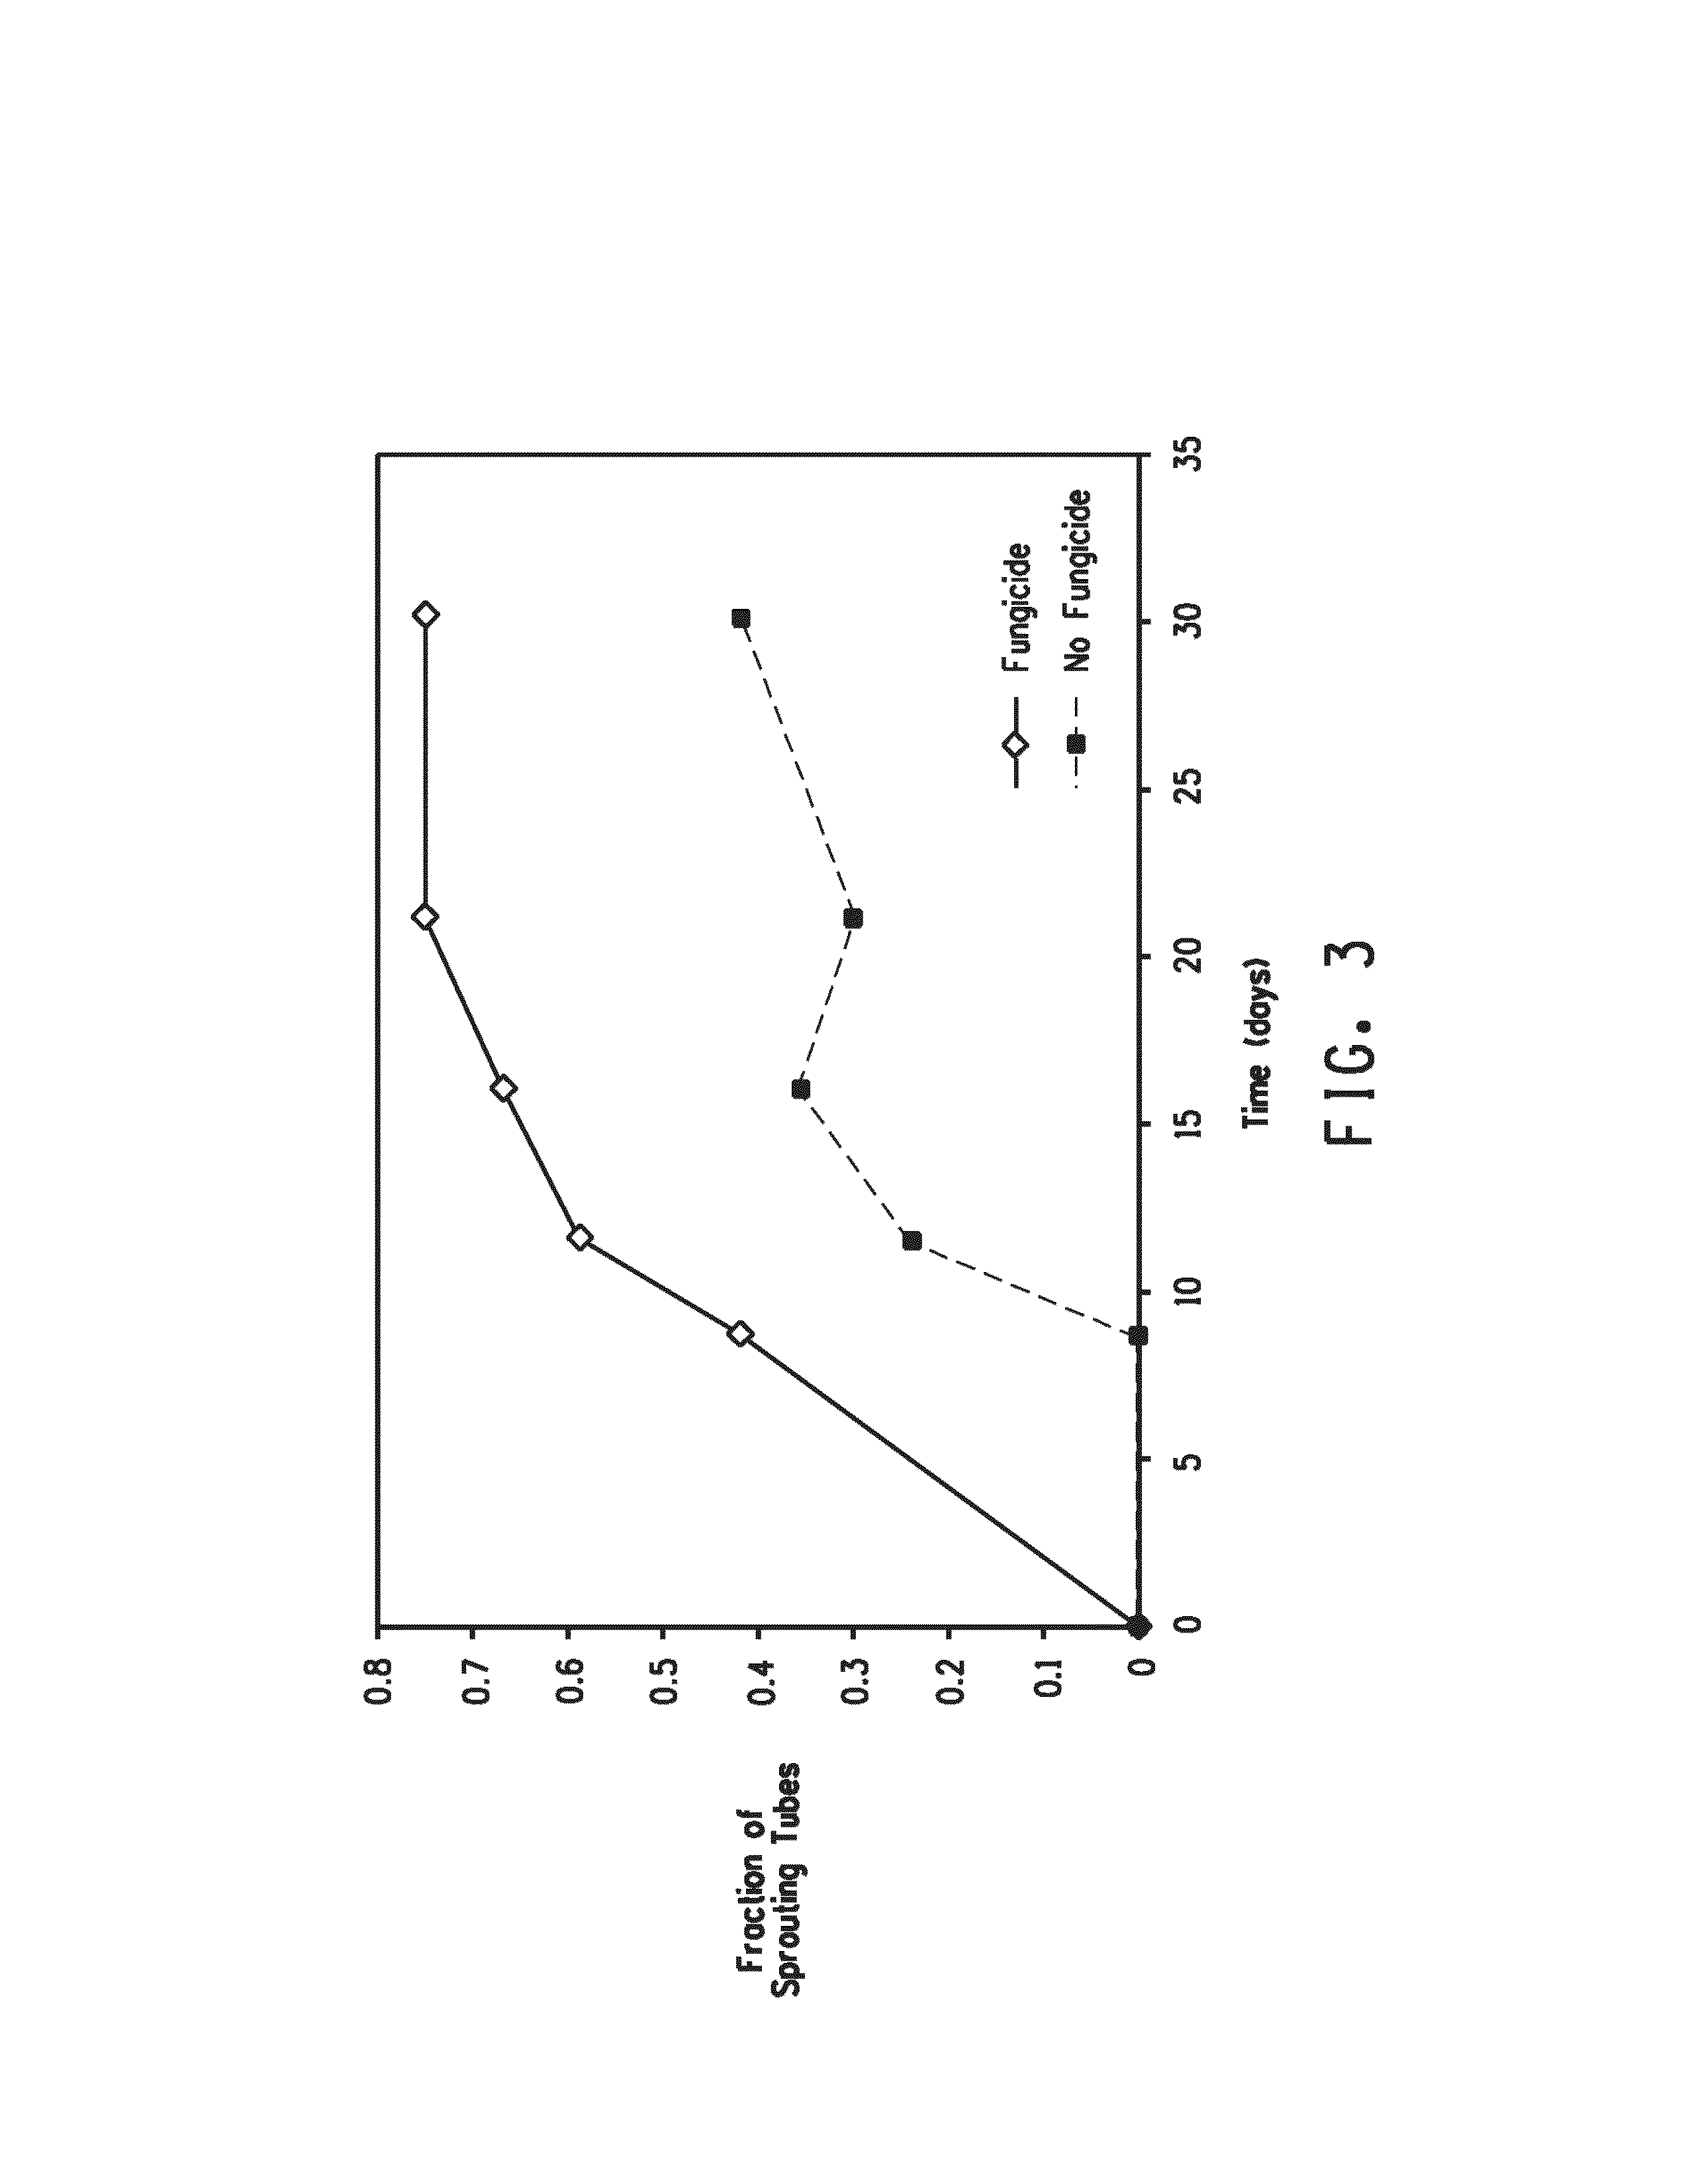 Plant artificial seeds and methods for the production thereof